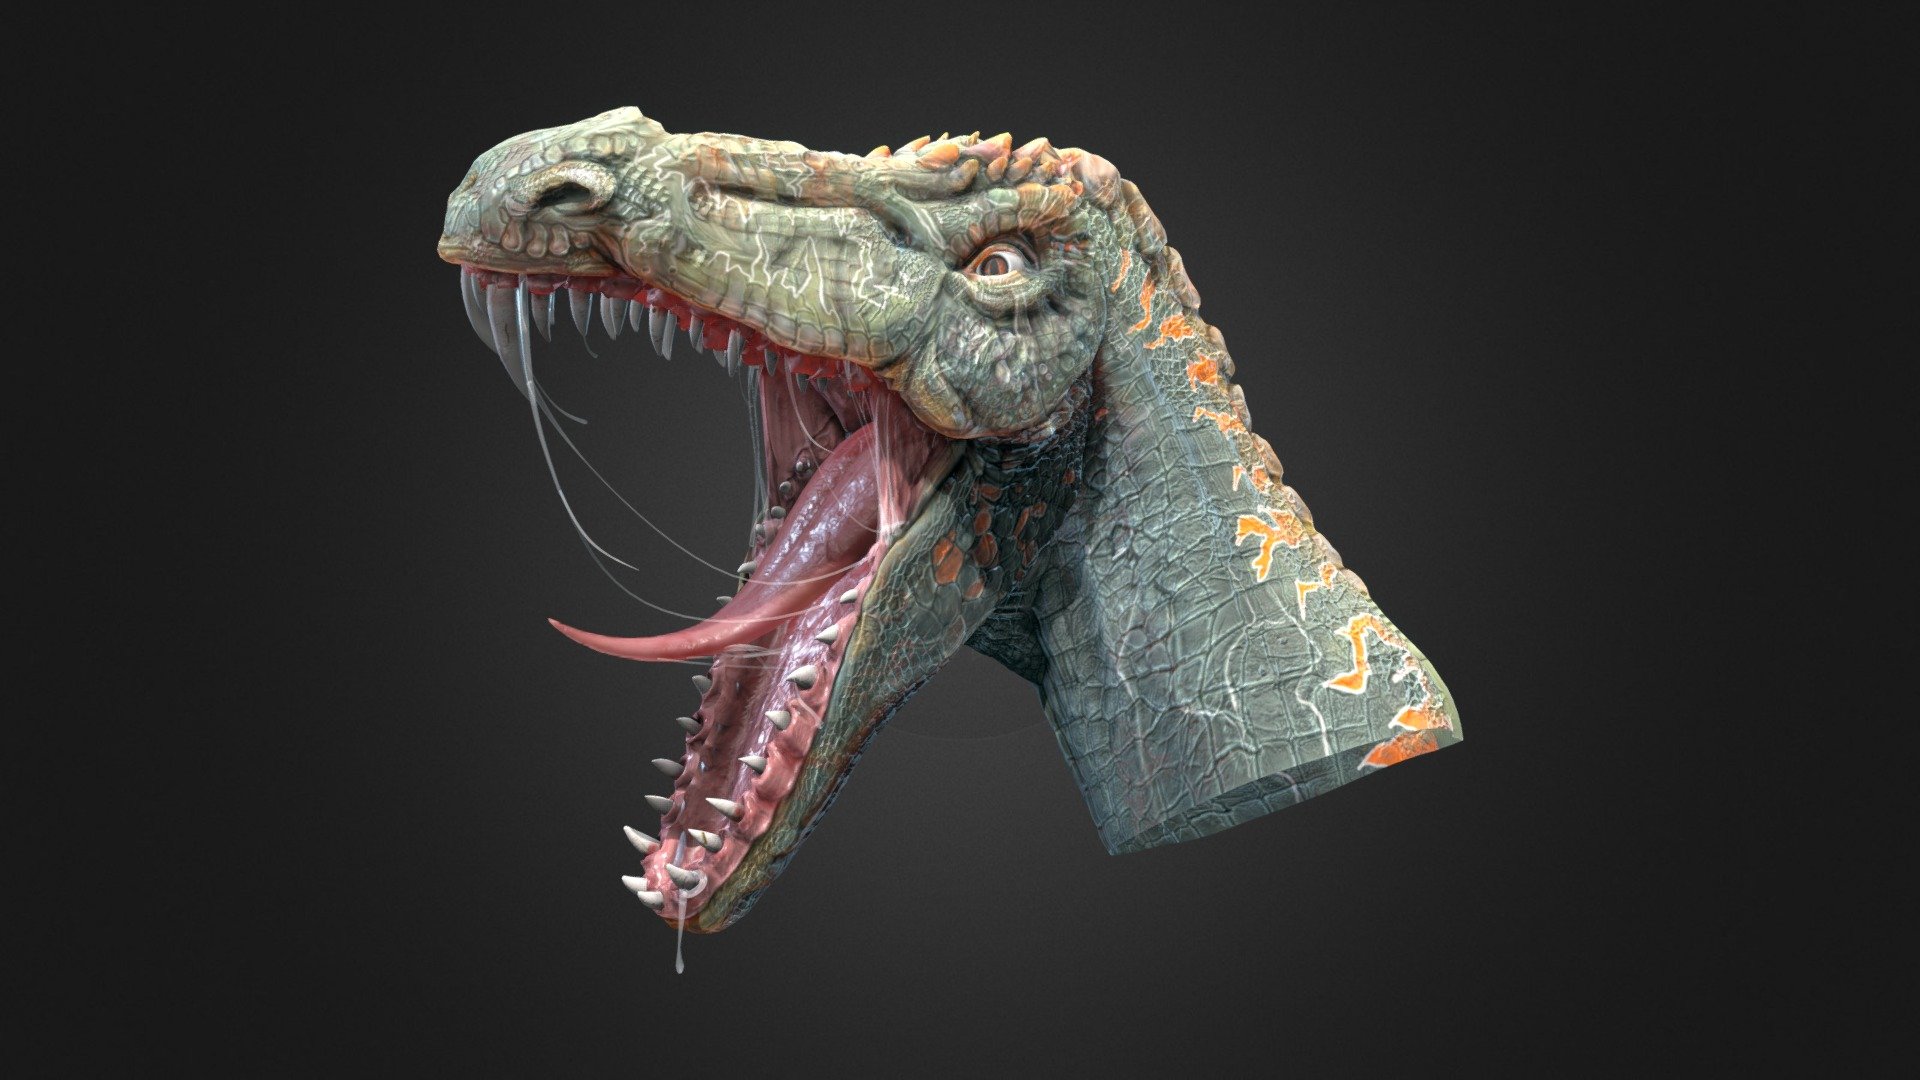 Dinosaur - opened mouth
Created using Blender 2.8, Zbrush, Substance Painter and Photoshop 3d model